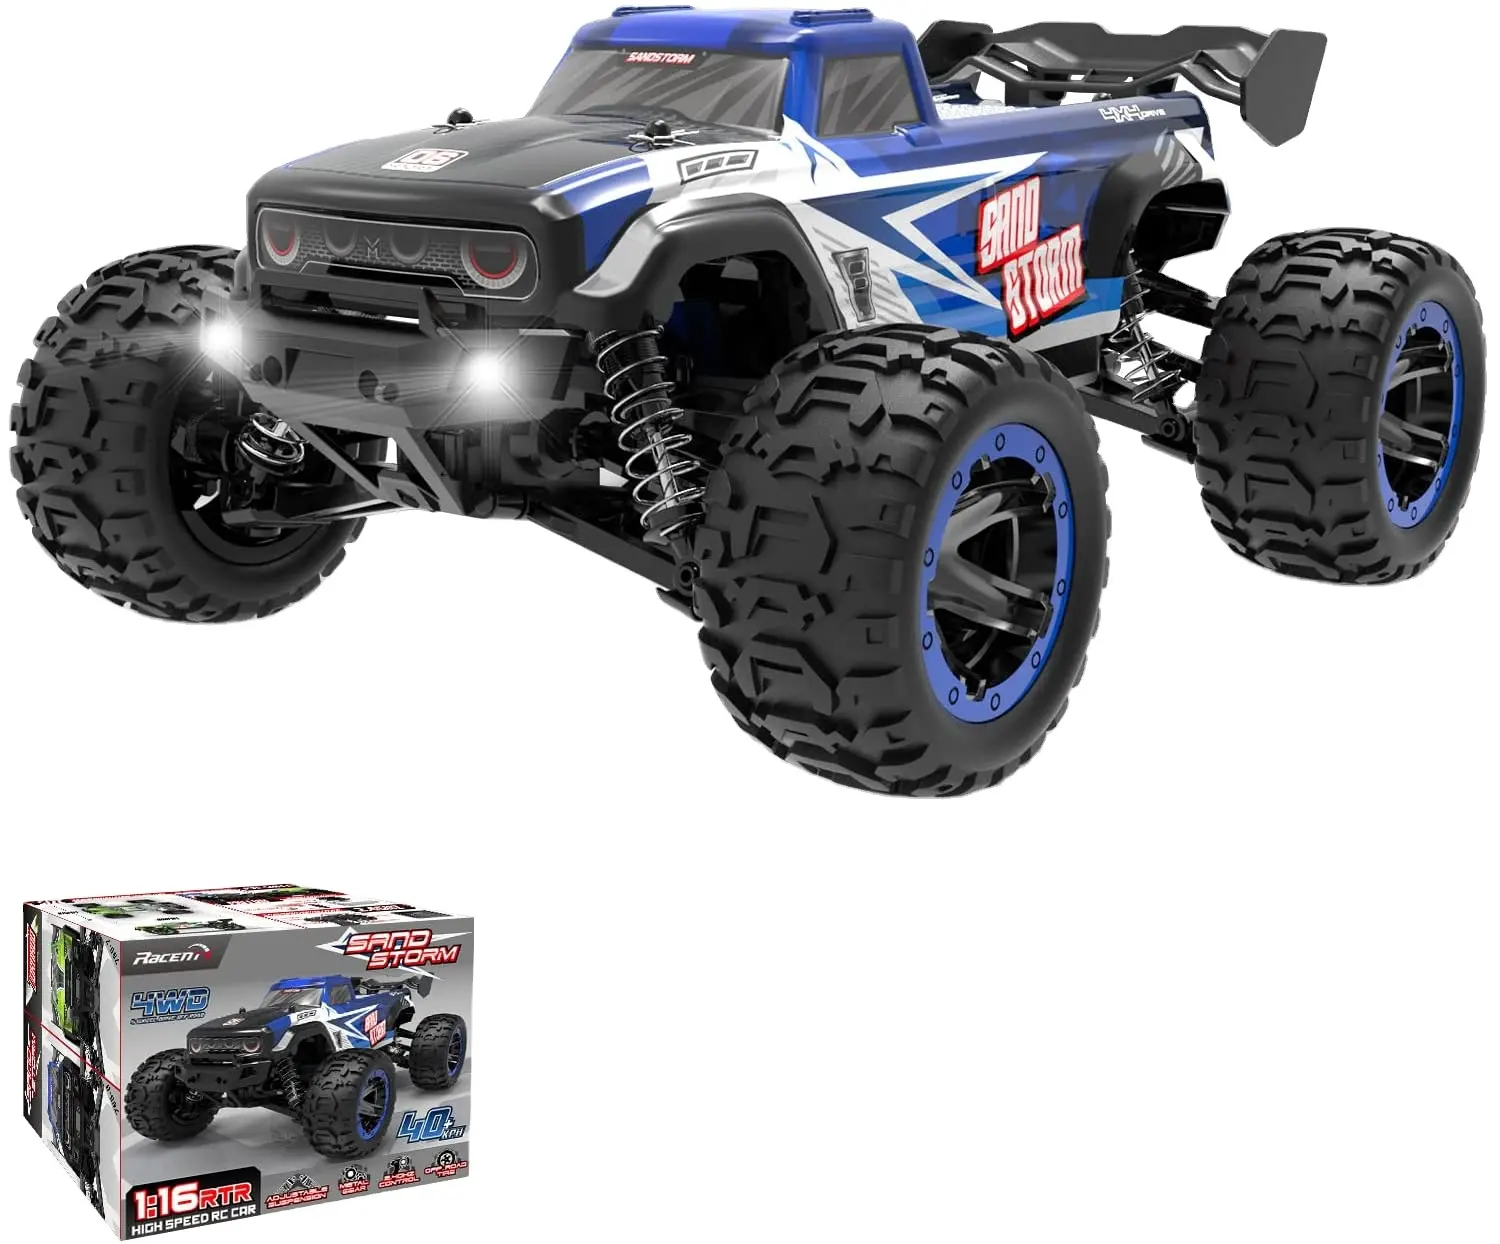 2.4G Factory Manufacture Electric Remote Control Car Toy 1:8 fast Rc Car 4x4 High Speed Truck For kid and adult